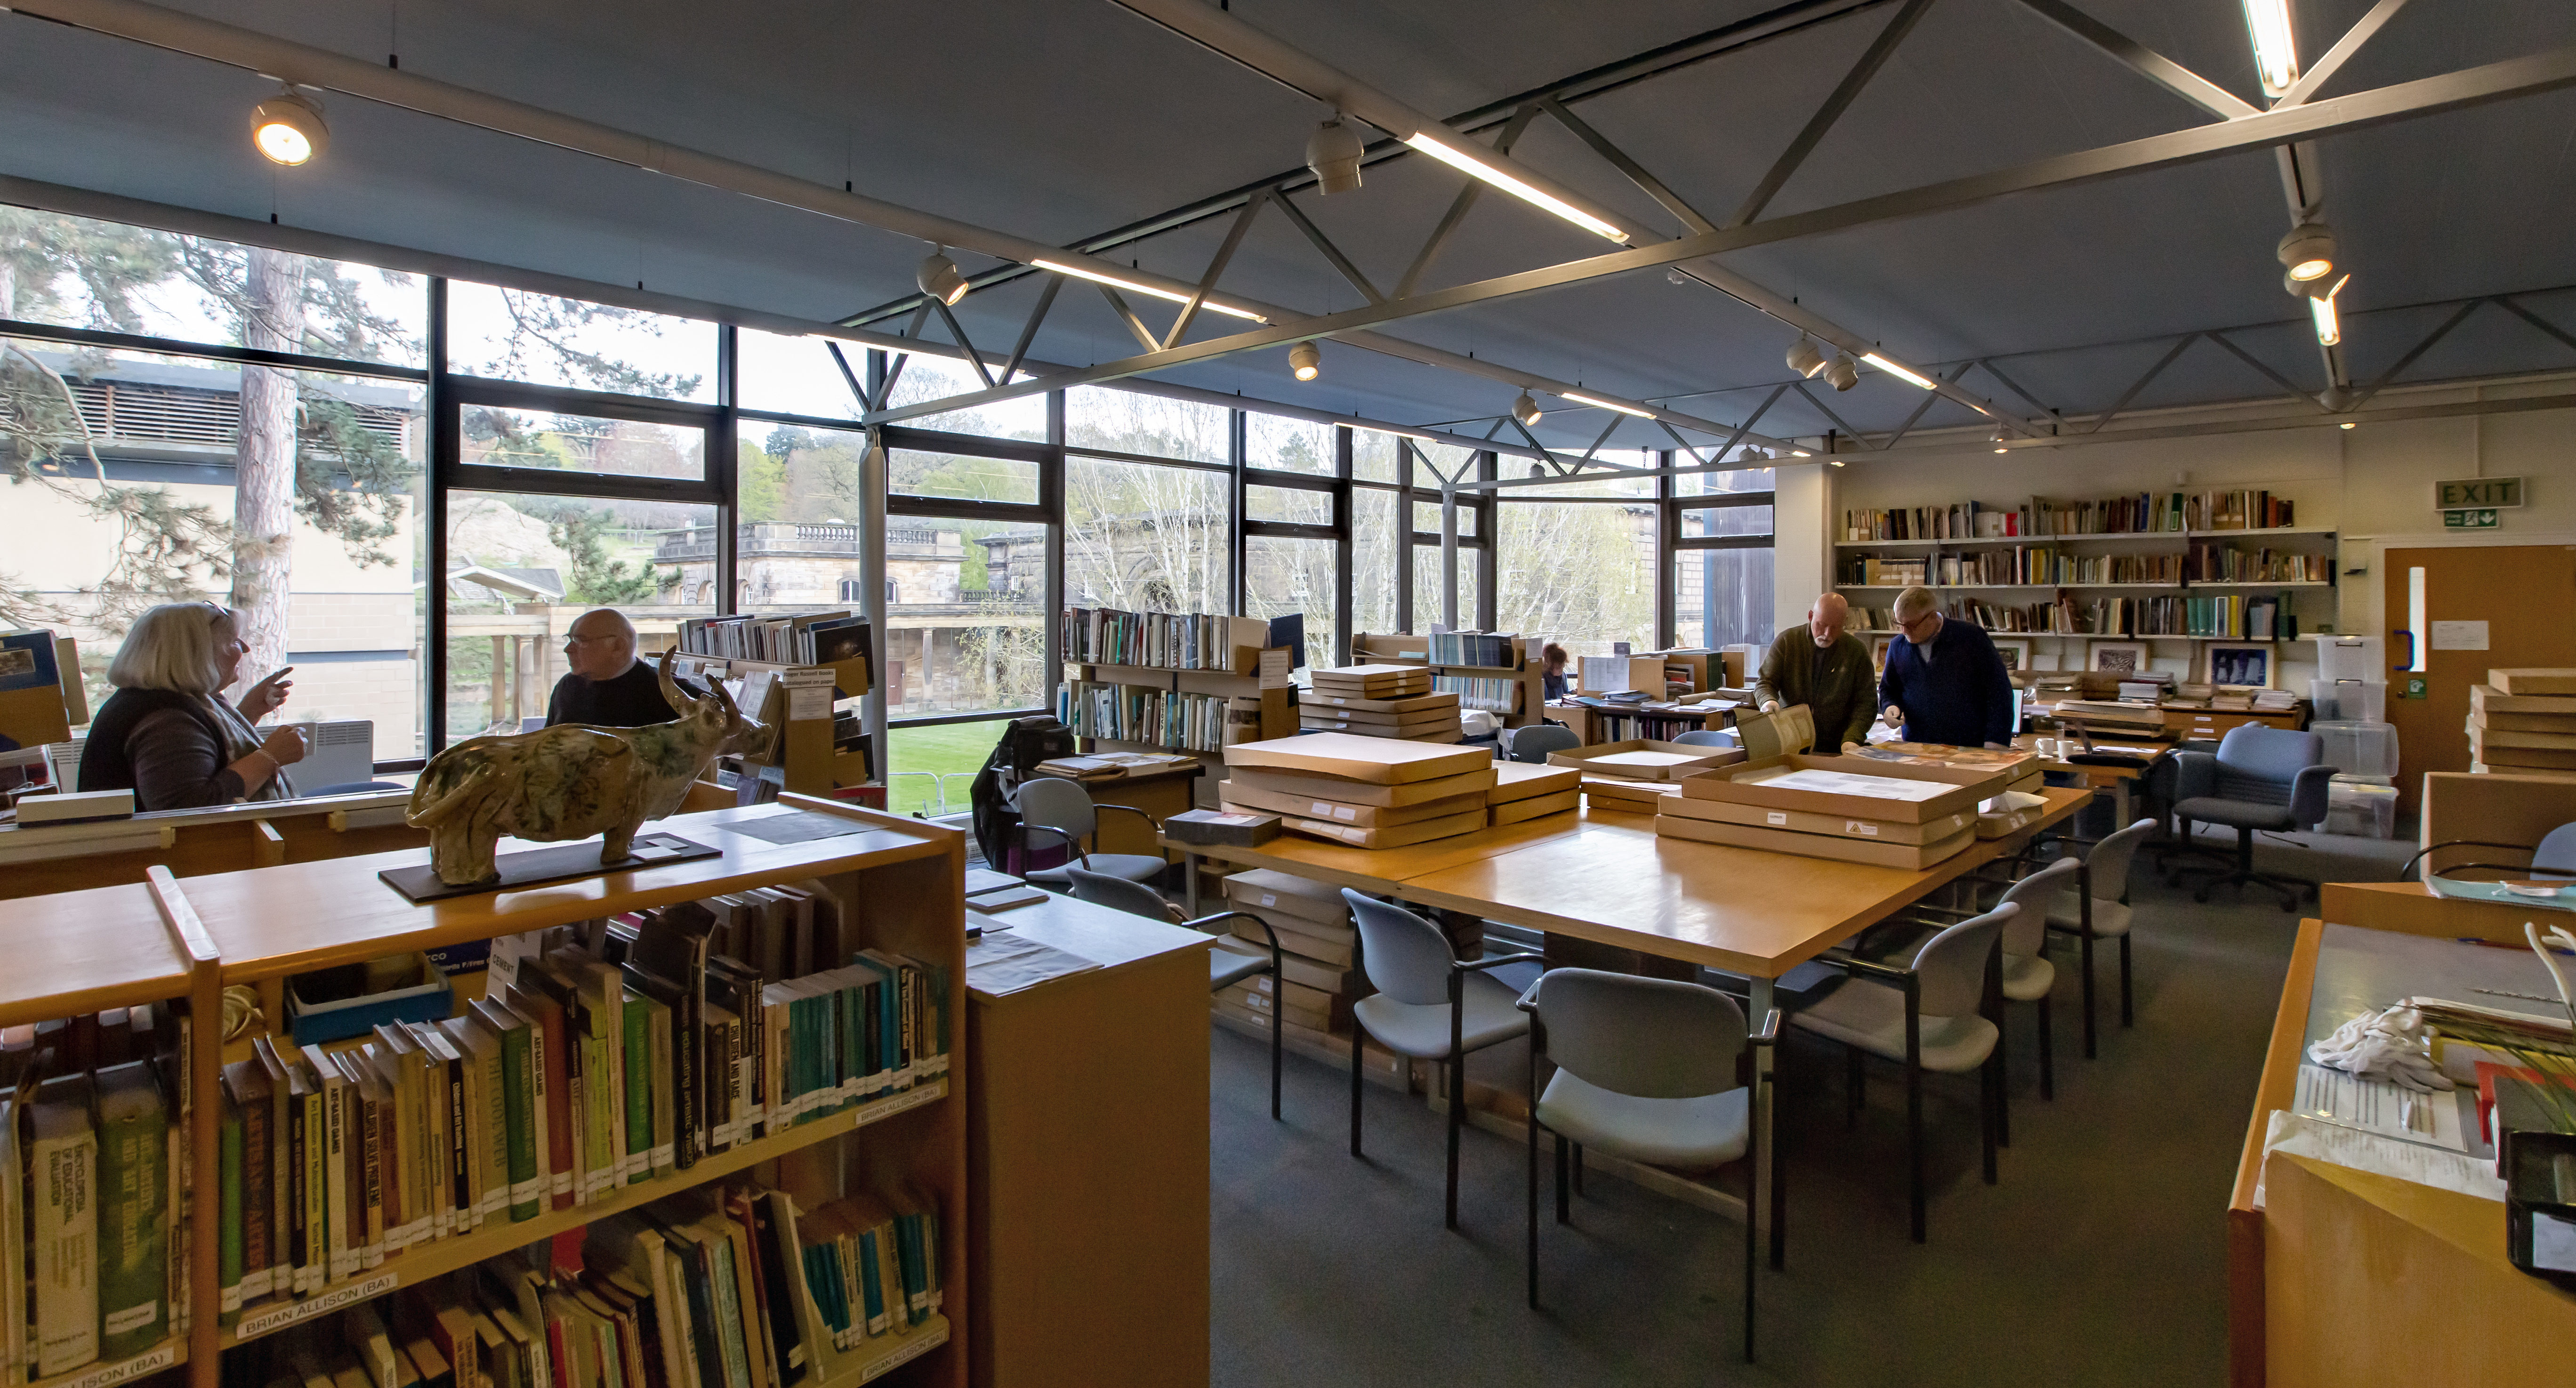 Four people stood amongst bookshelves and tables in the National Arts Education Archive.